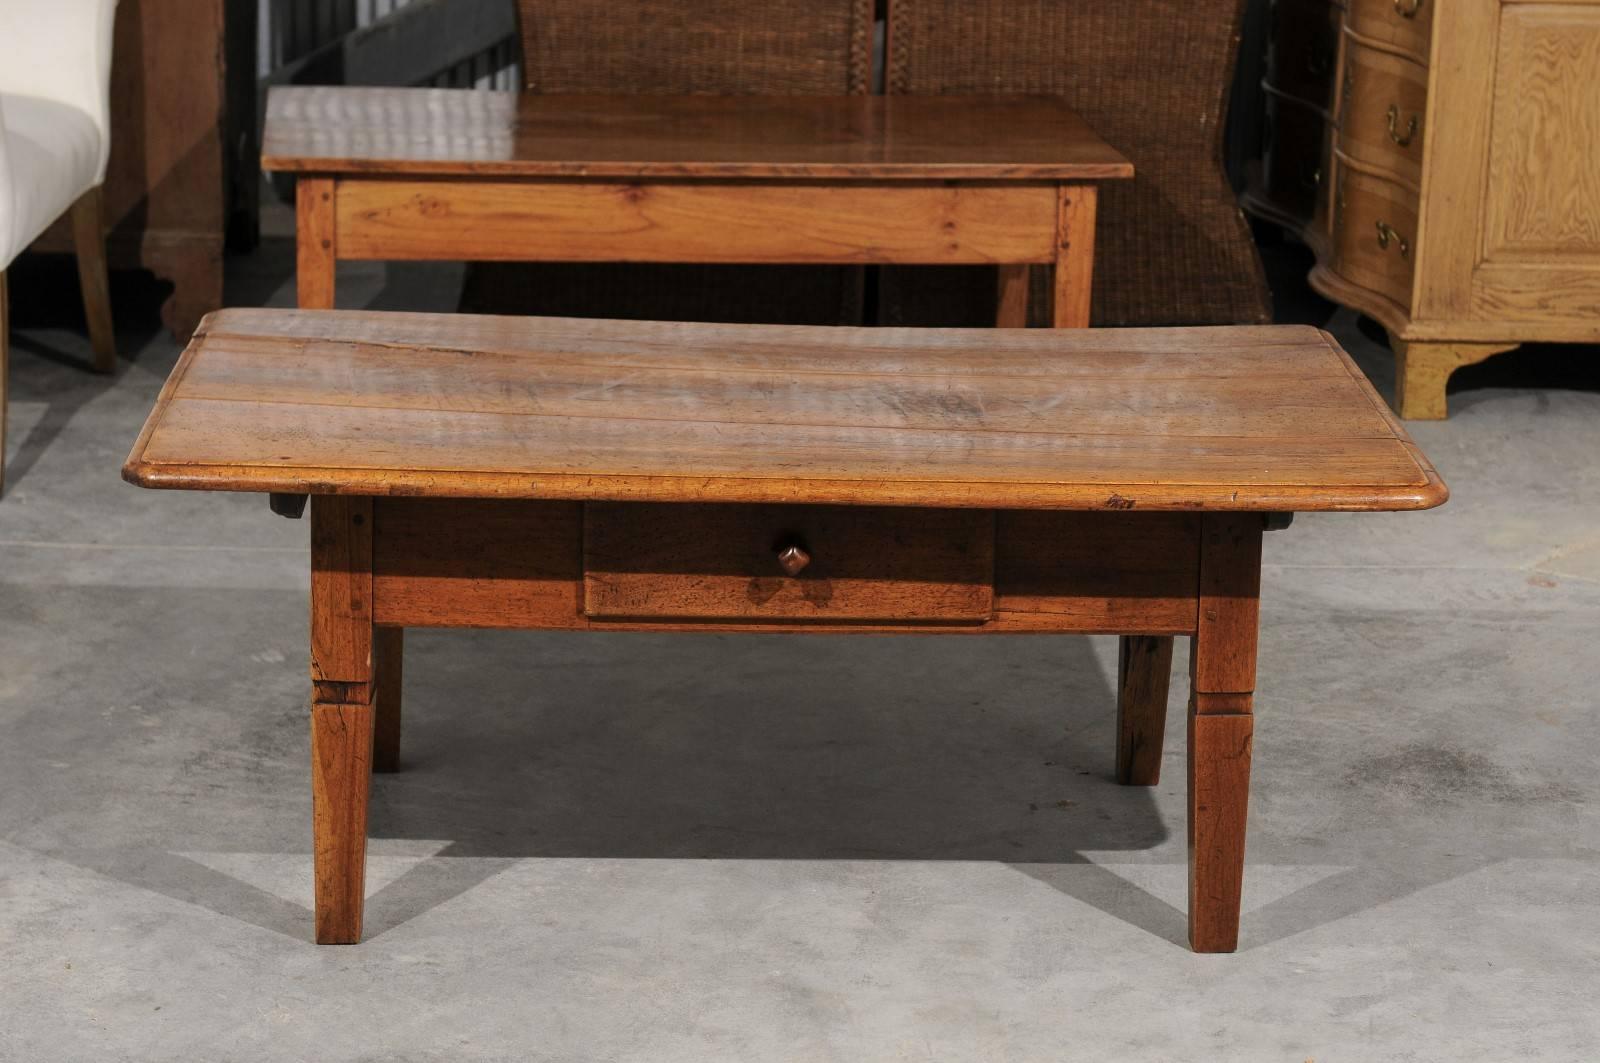 Cherry French Walnut Coffee Table with Single Drawer and Tapered Legs from the 1870s